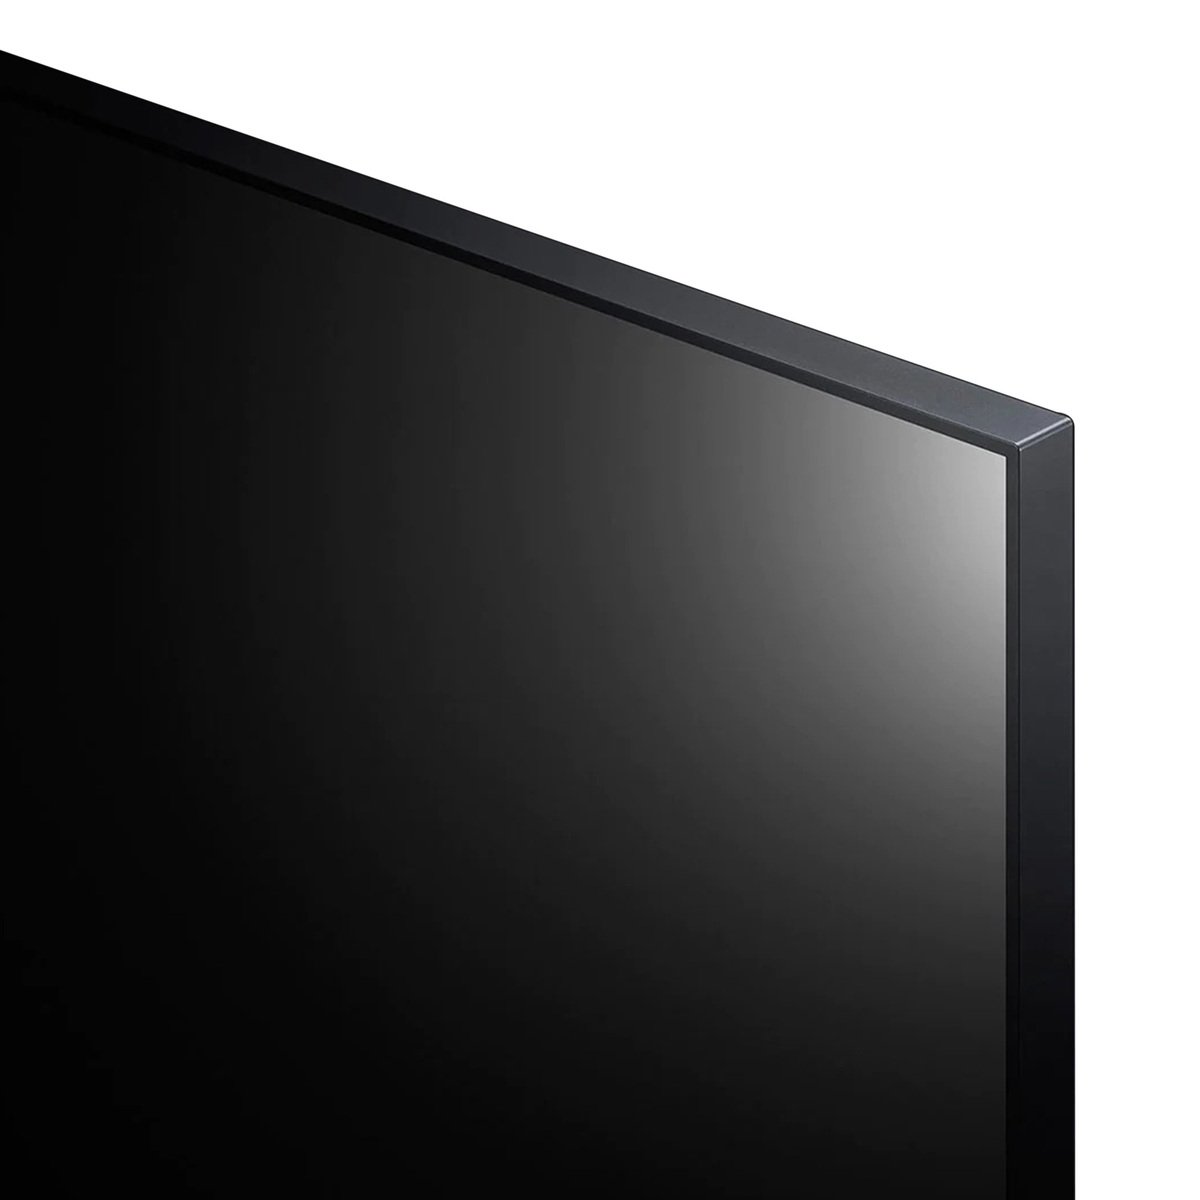 LG UHD 4K Smart TV 70 Inch UP77 Series, New 2021, Cinema Screen Design 4K Active HDR webOS Smart with ThinQ AI